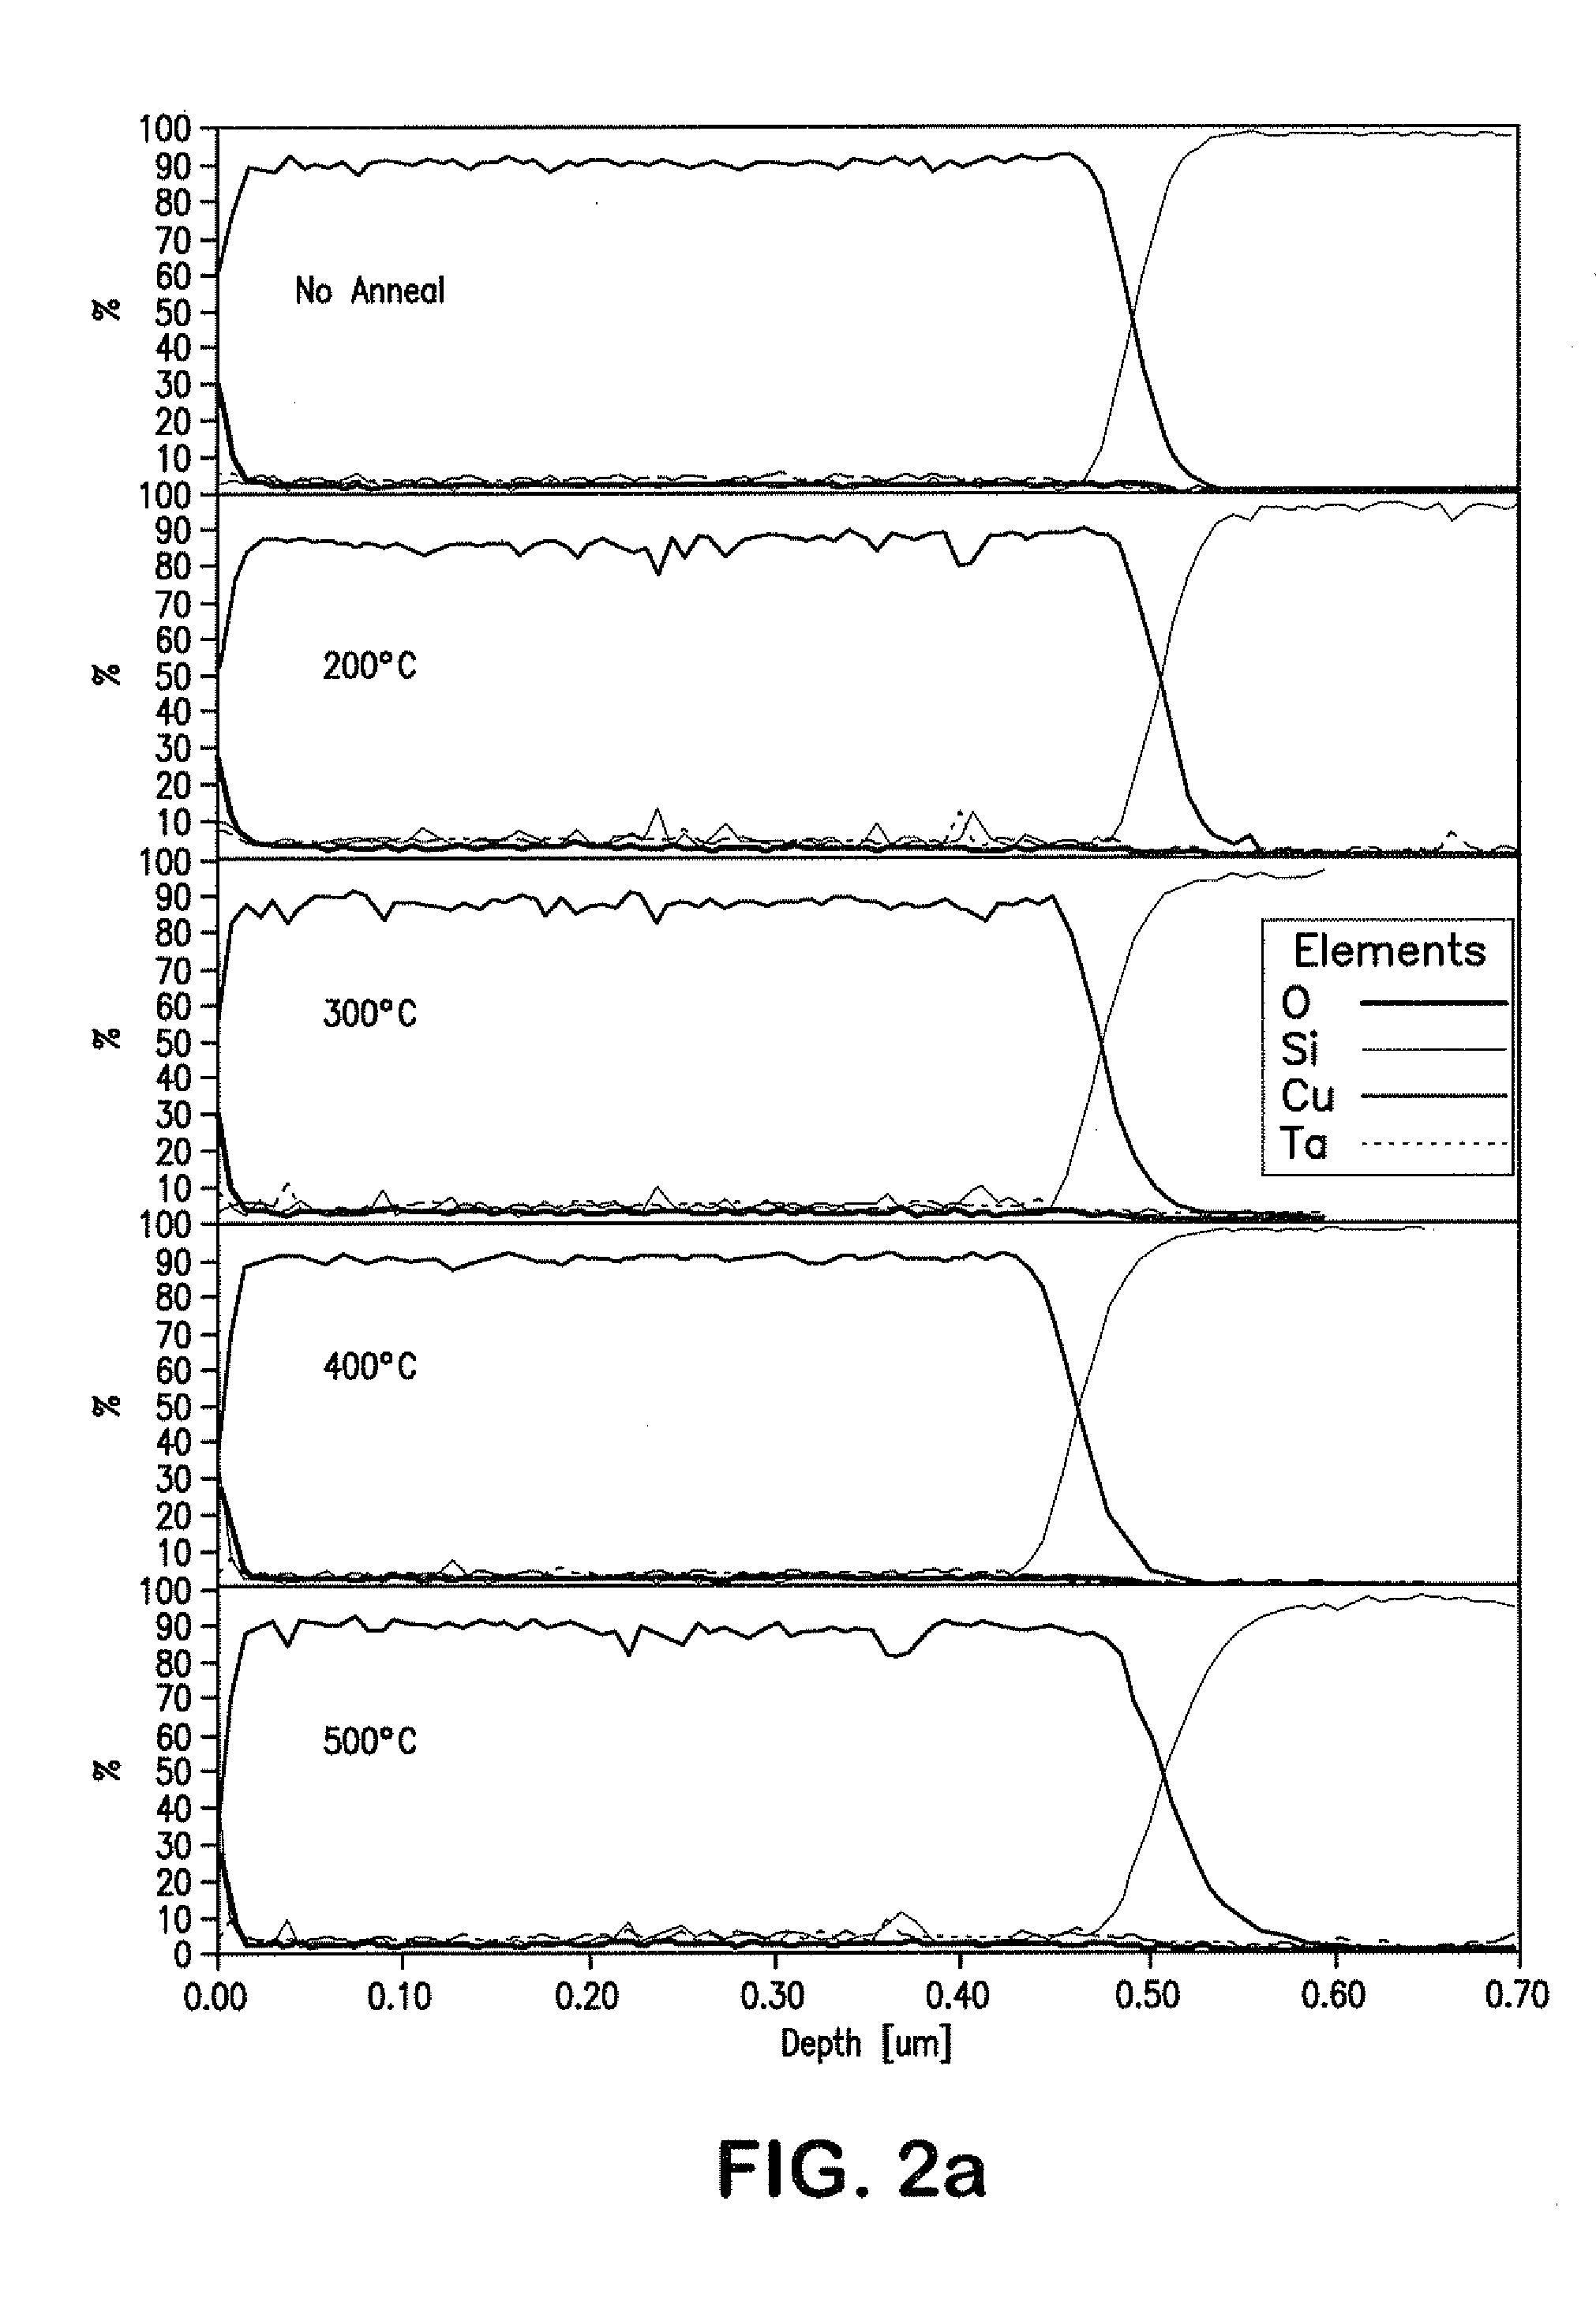 Refractory metal-doped sputtering targets, thin films prepared therewith and electronic device elements containing such films